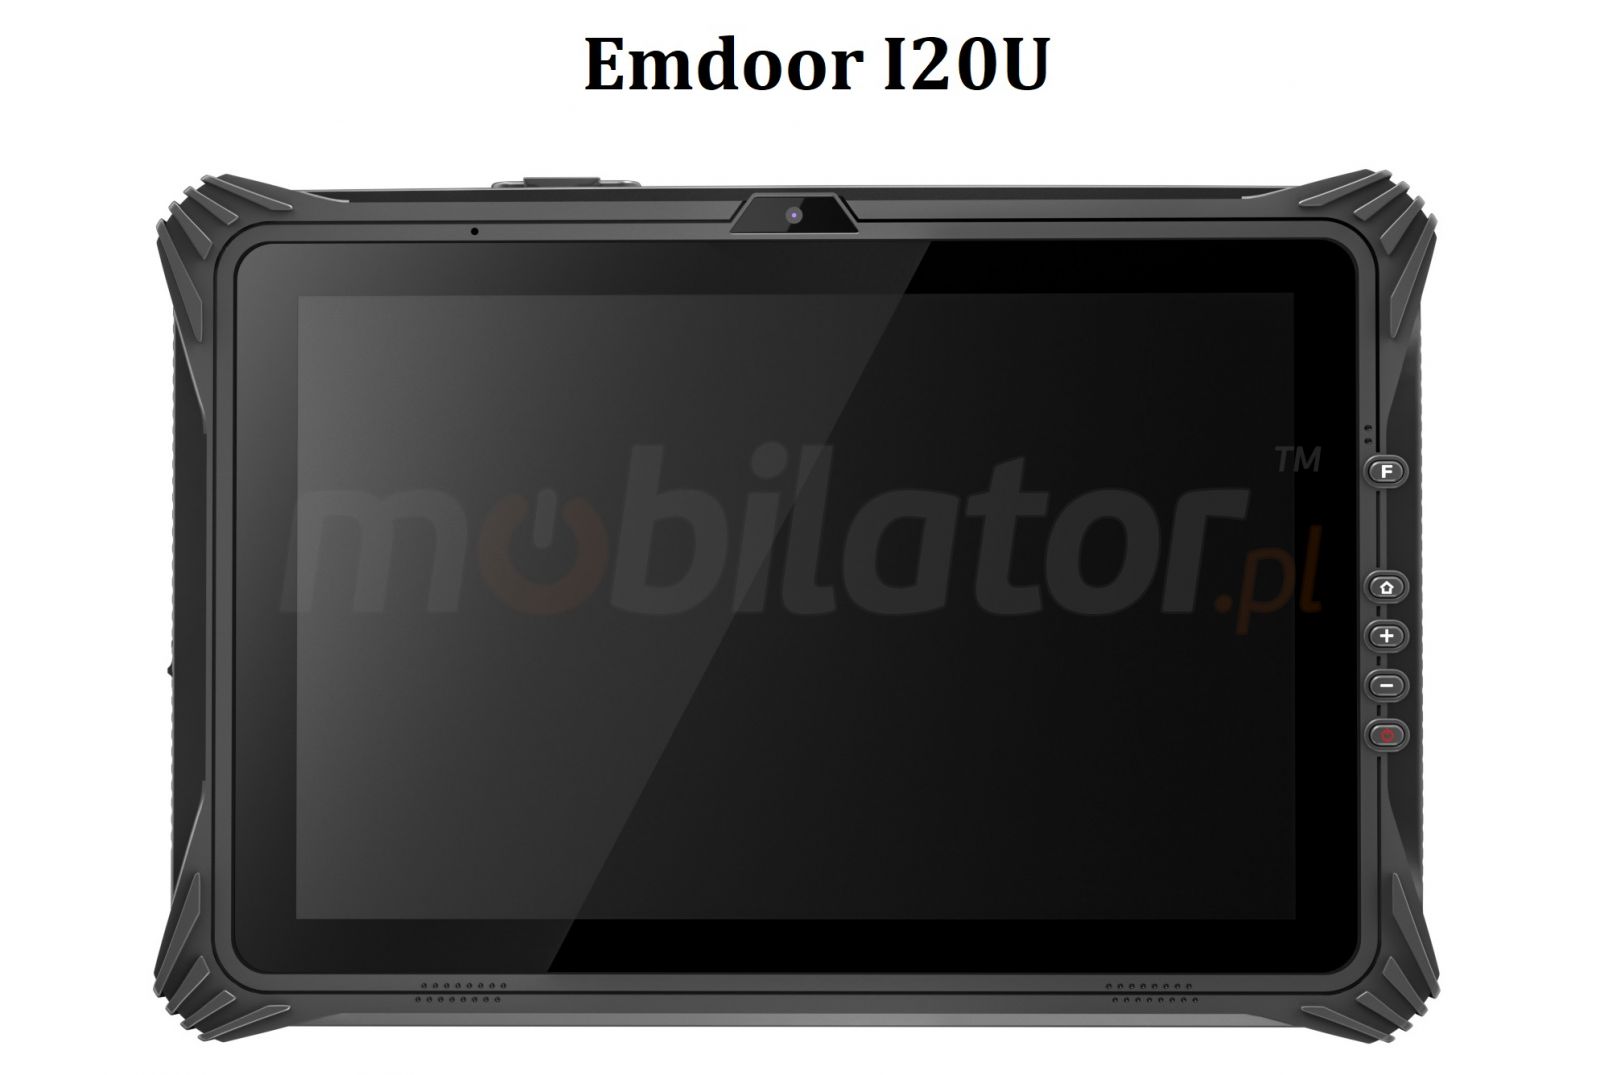 Emdoor I20U v.4 - Drop-proof 12-inch tablet with Windows 10 Home, Bluetooth 4.2, 8GB RAM, 128GB disk, NFC and 4G 